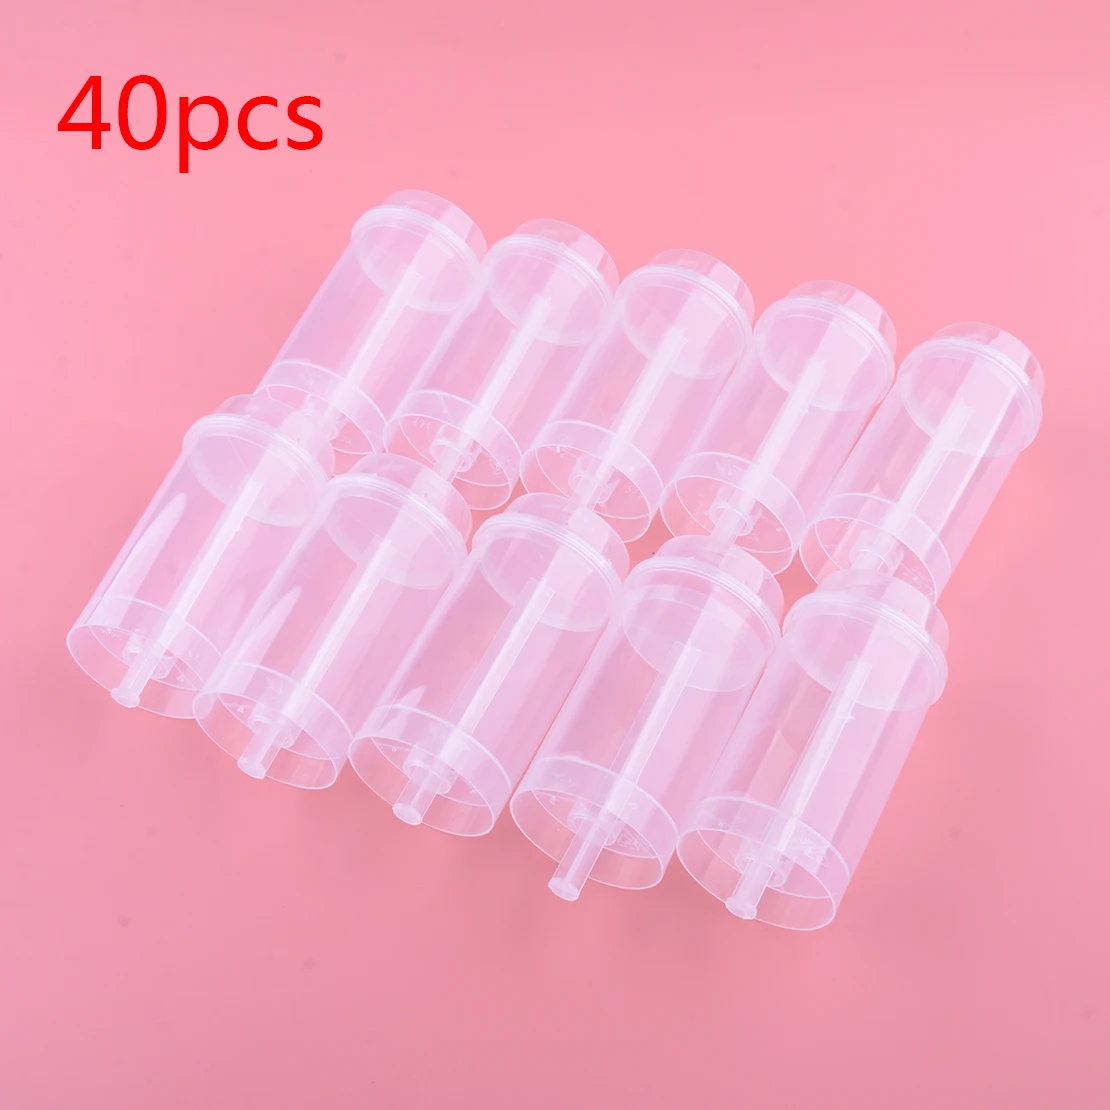 

40Pcs Anti-skid DIY Pushable Push Up Pop Cake Holders Containers PP for Cheesecake Mousse Pudding Ice-creams Jelly Transparent